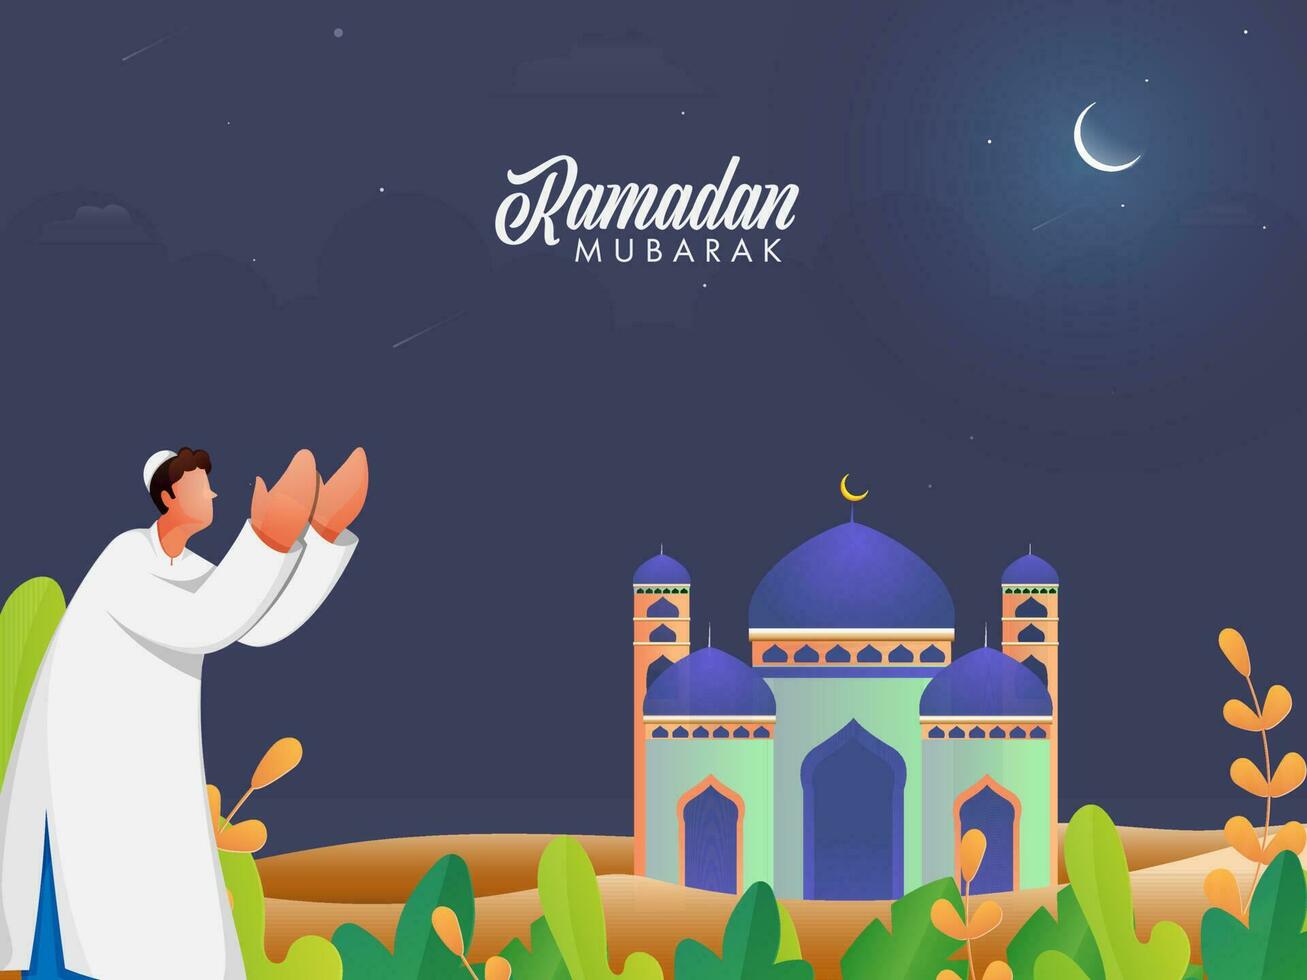 Ramadan Mubarak Poster Design With Muslim Man Offering Namaz, Glossy Mosque, Leaves On Nighttime Blue And Desert Background. vector